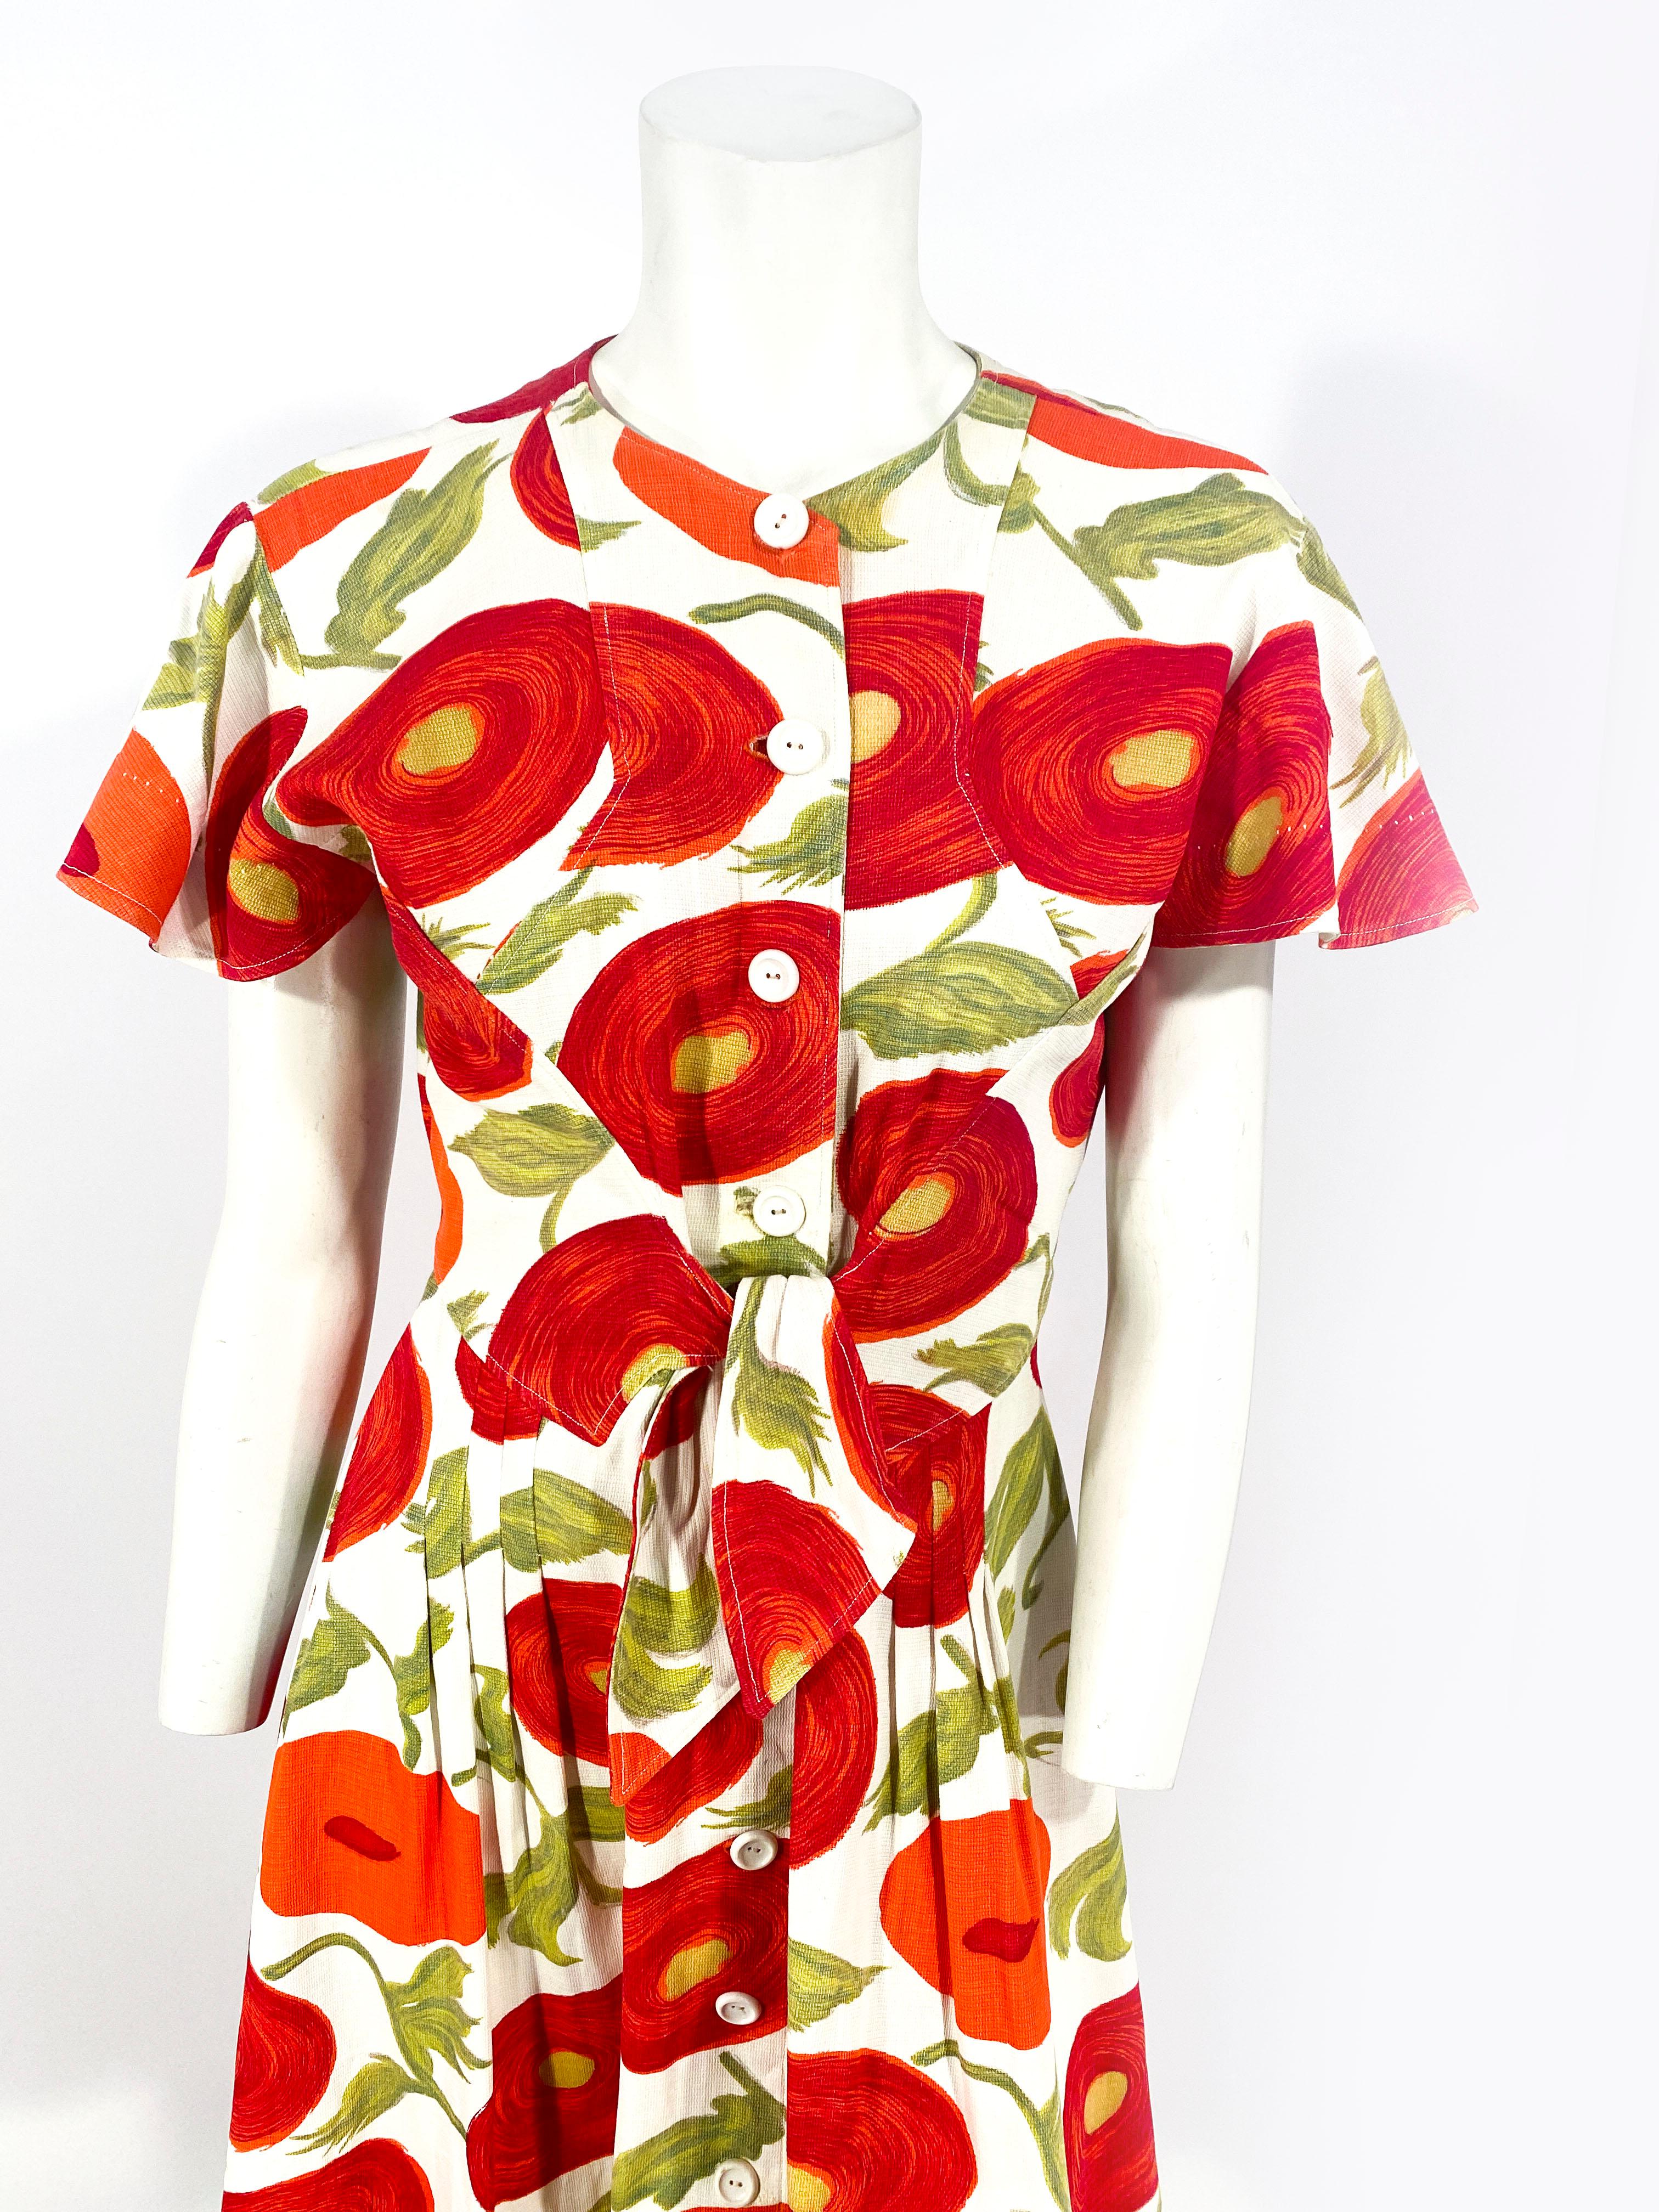 1950s surreal floral printed day dress made of a cotton pique. The structure of the dress features an enlarged caplet sleeve, incorporated tie-sash in the front, button opening along the face, and a pleated skirt.